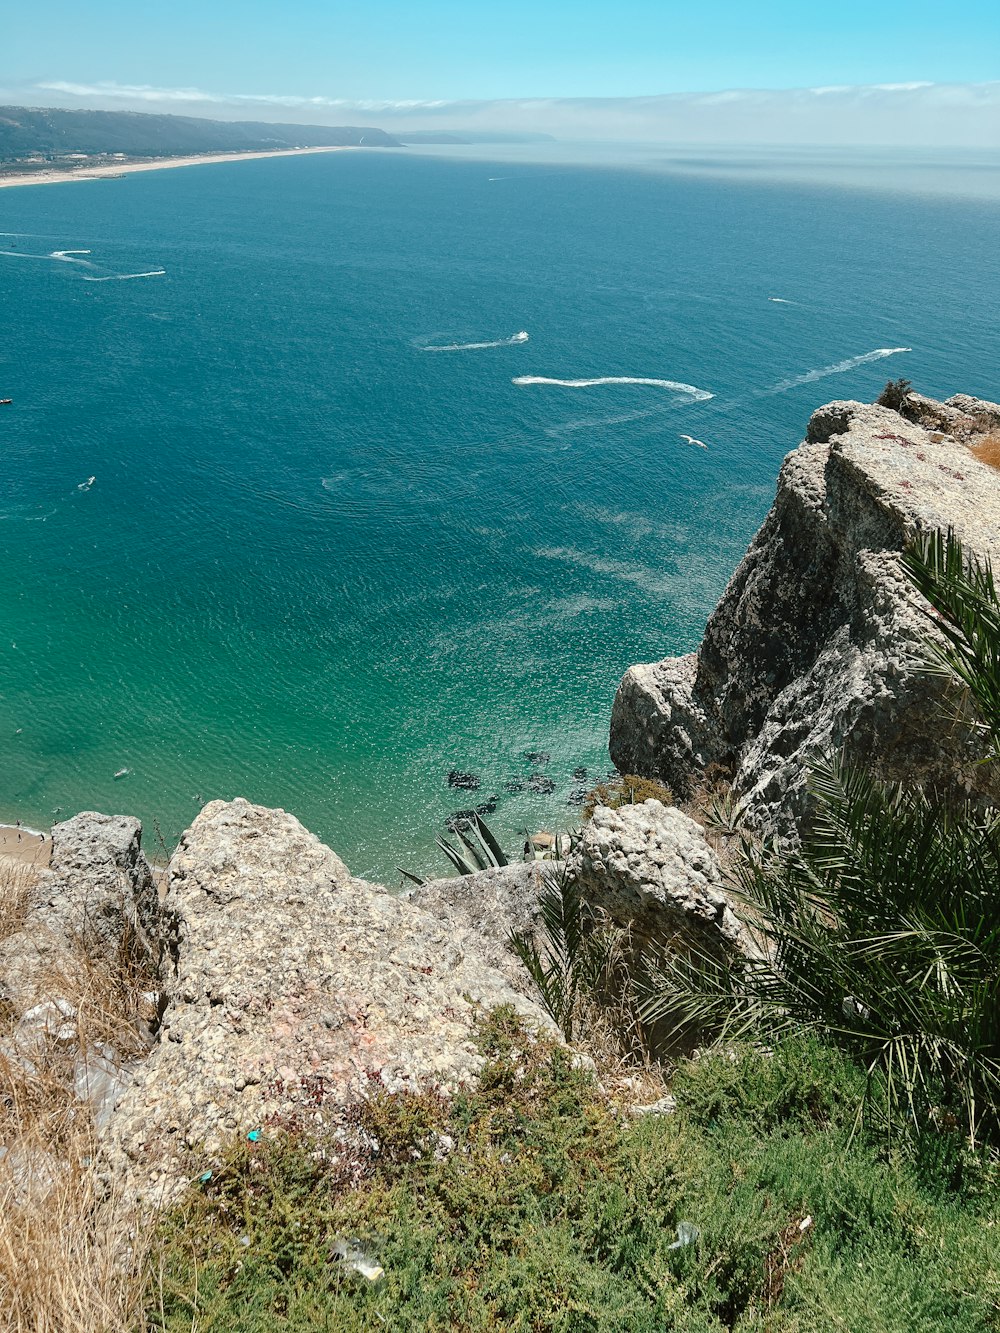 a cliff side with a body of water below